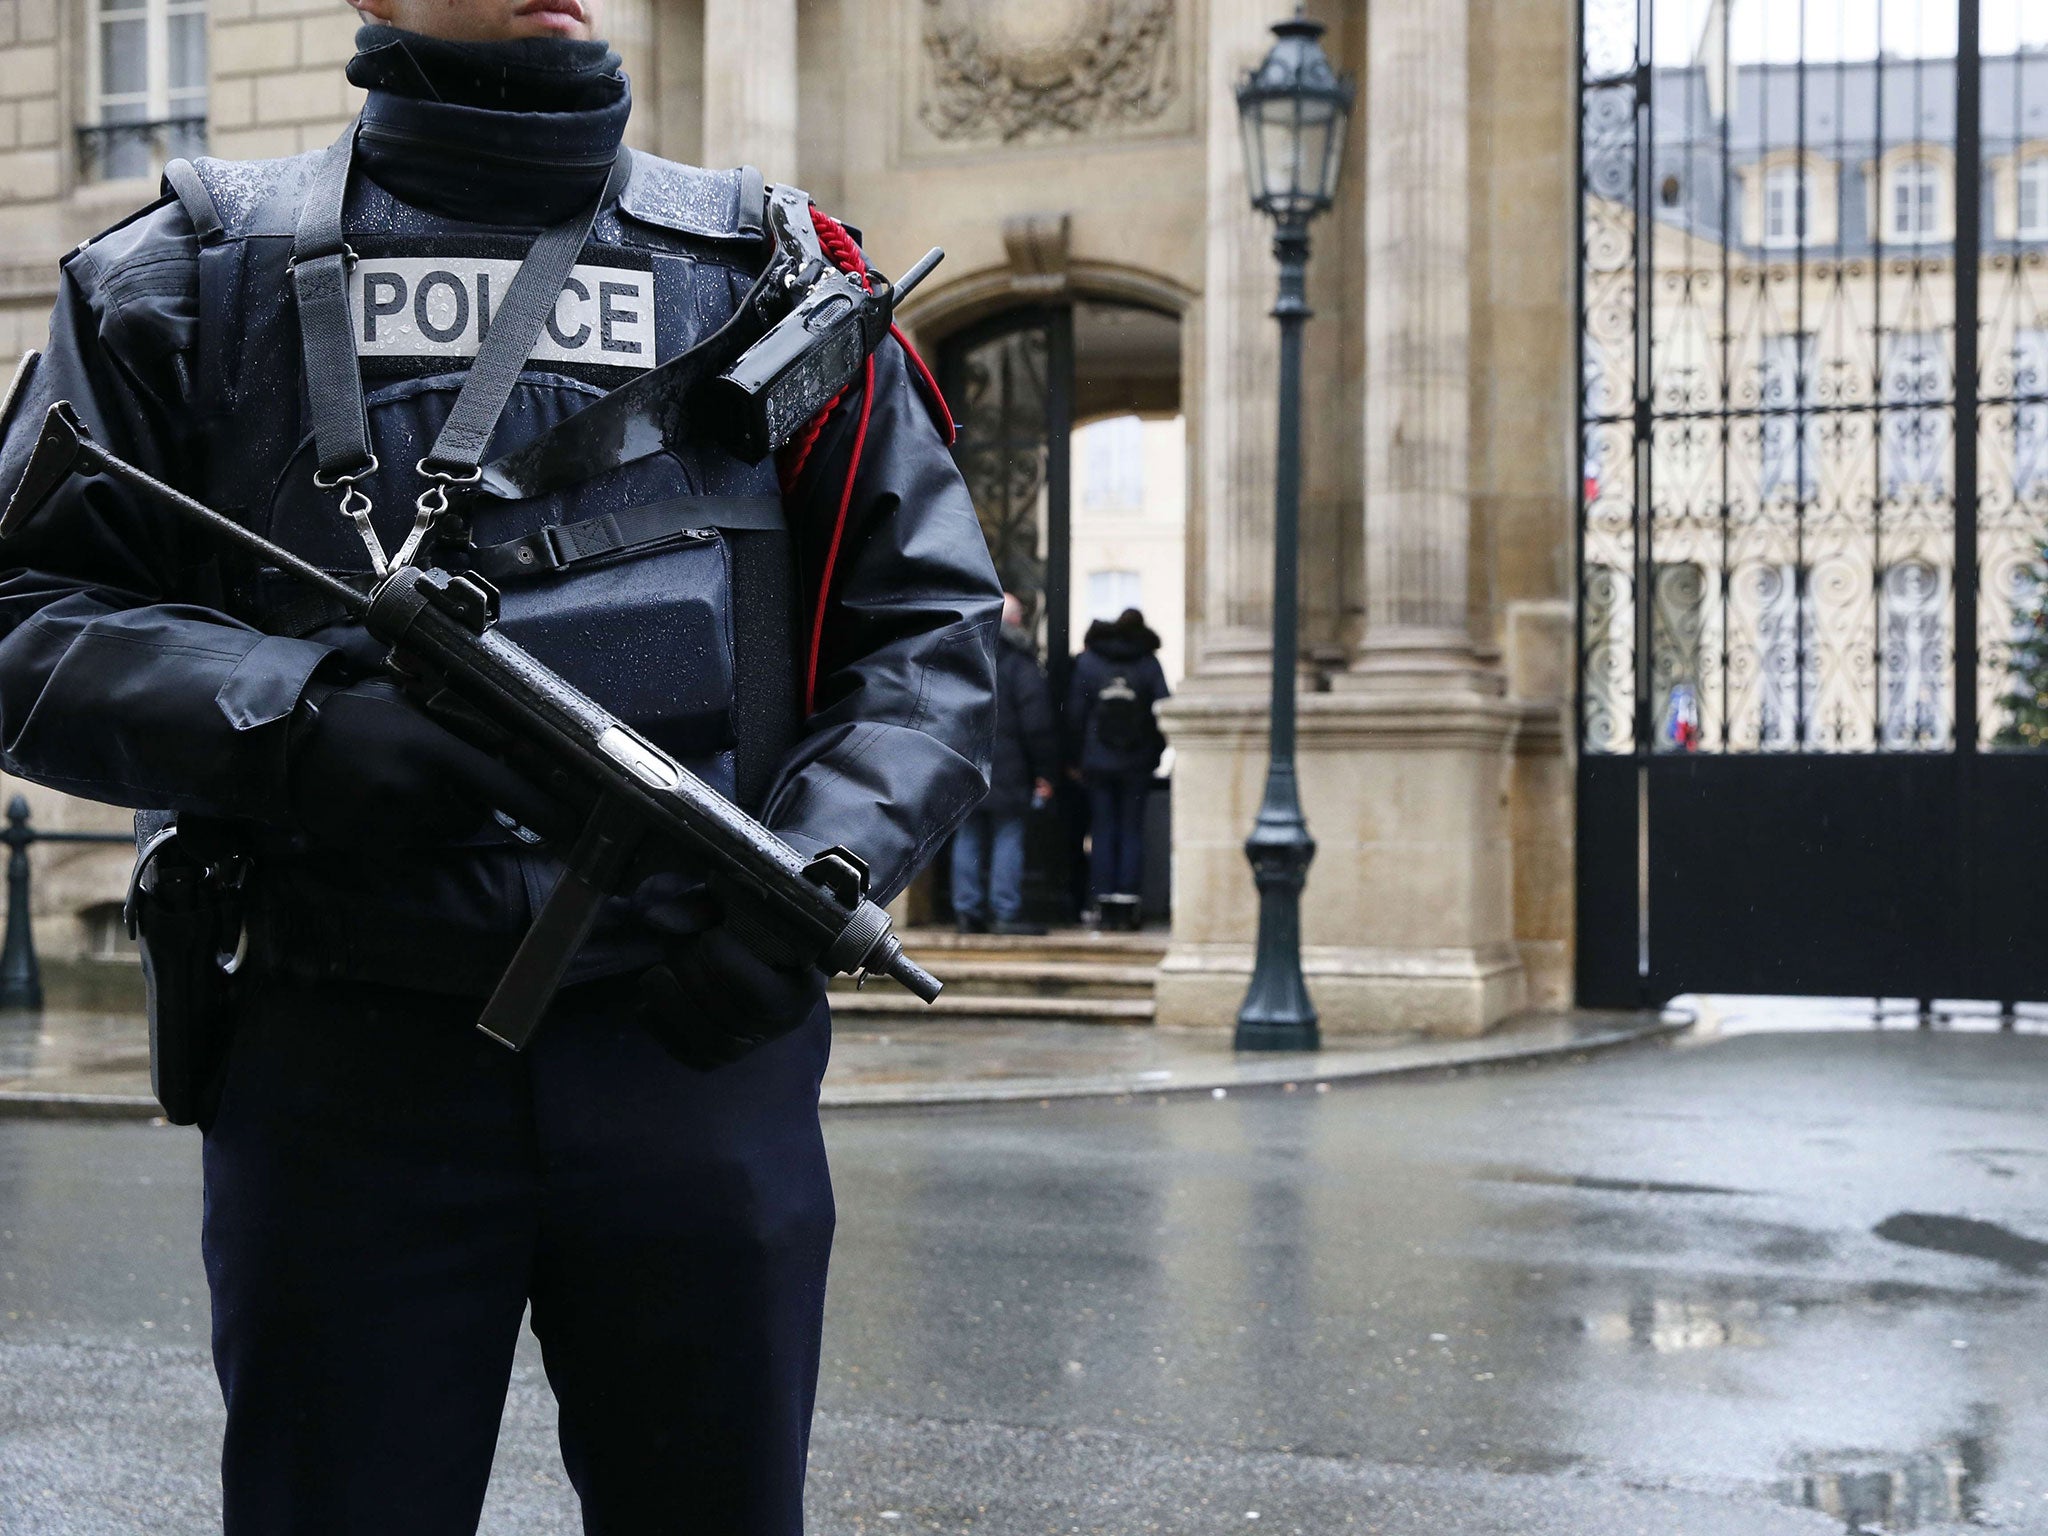 Authorities are combing the Yonne region in Burgundy, south east of Paris, and surrounding areas for the attackers.